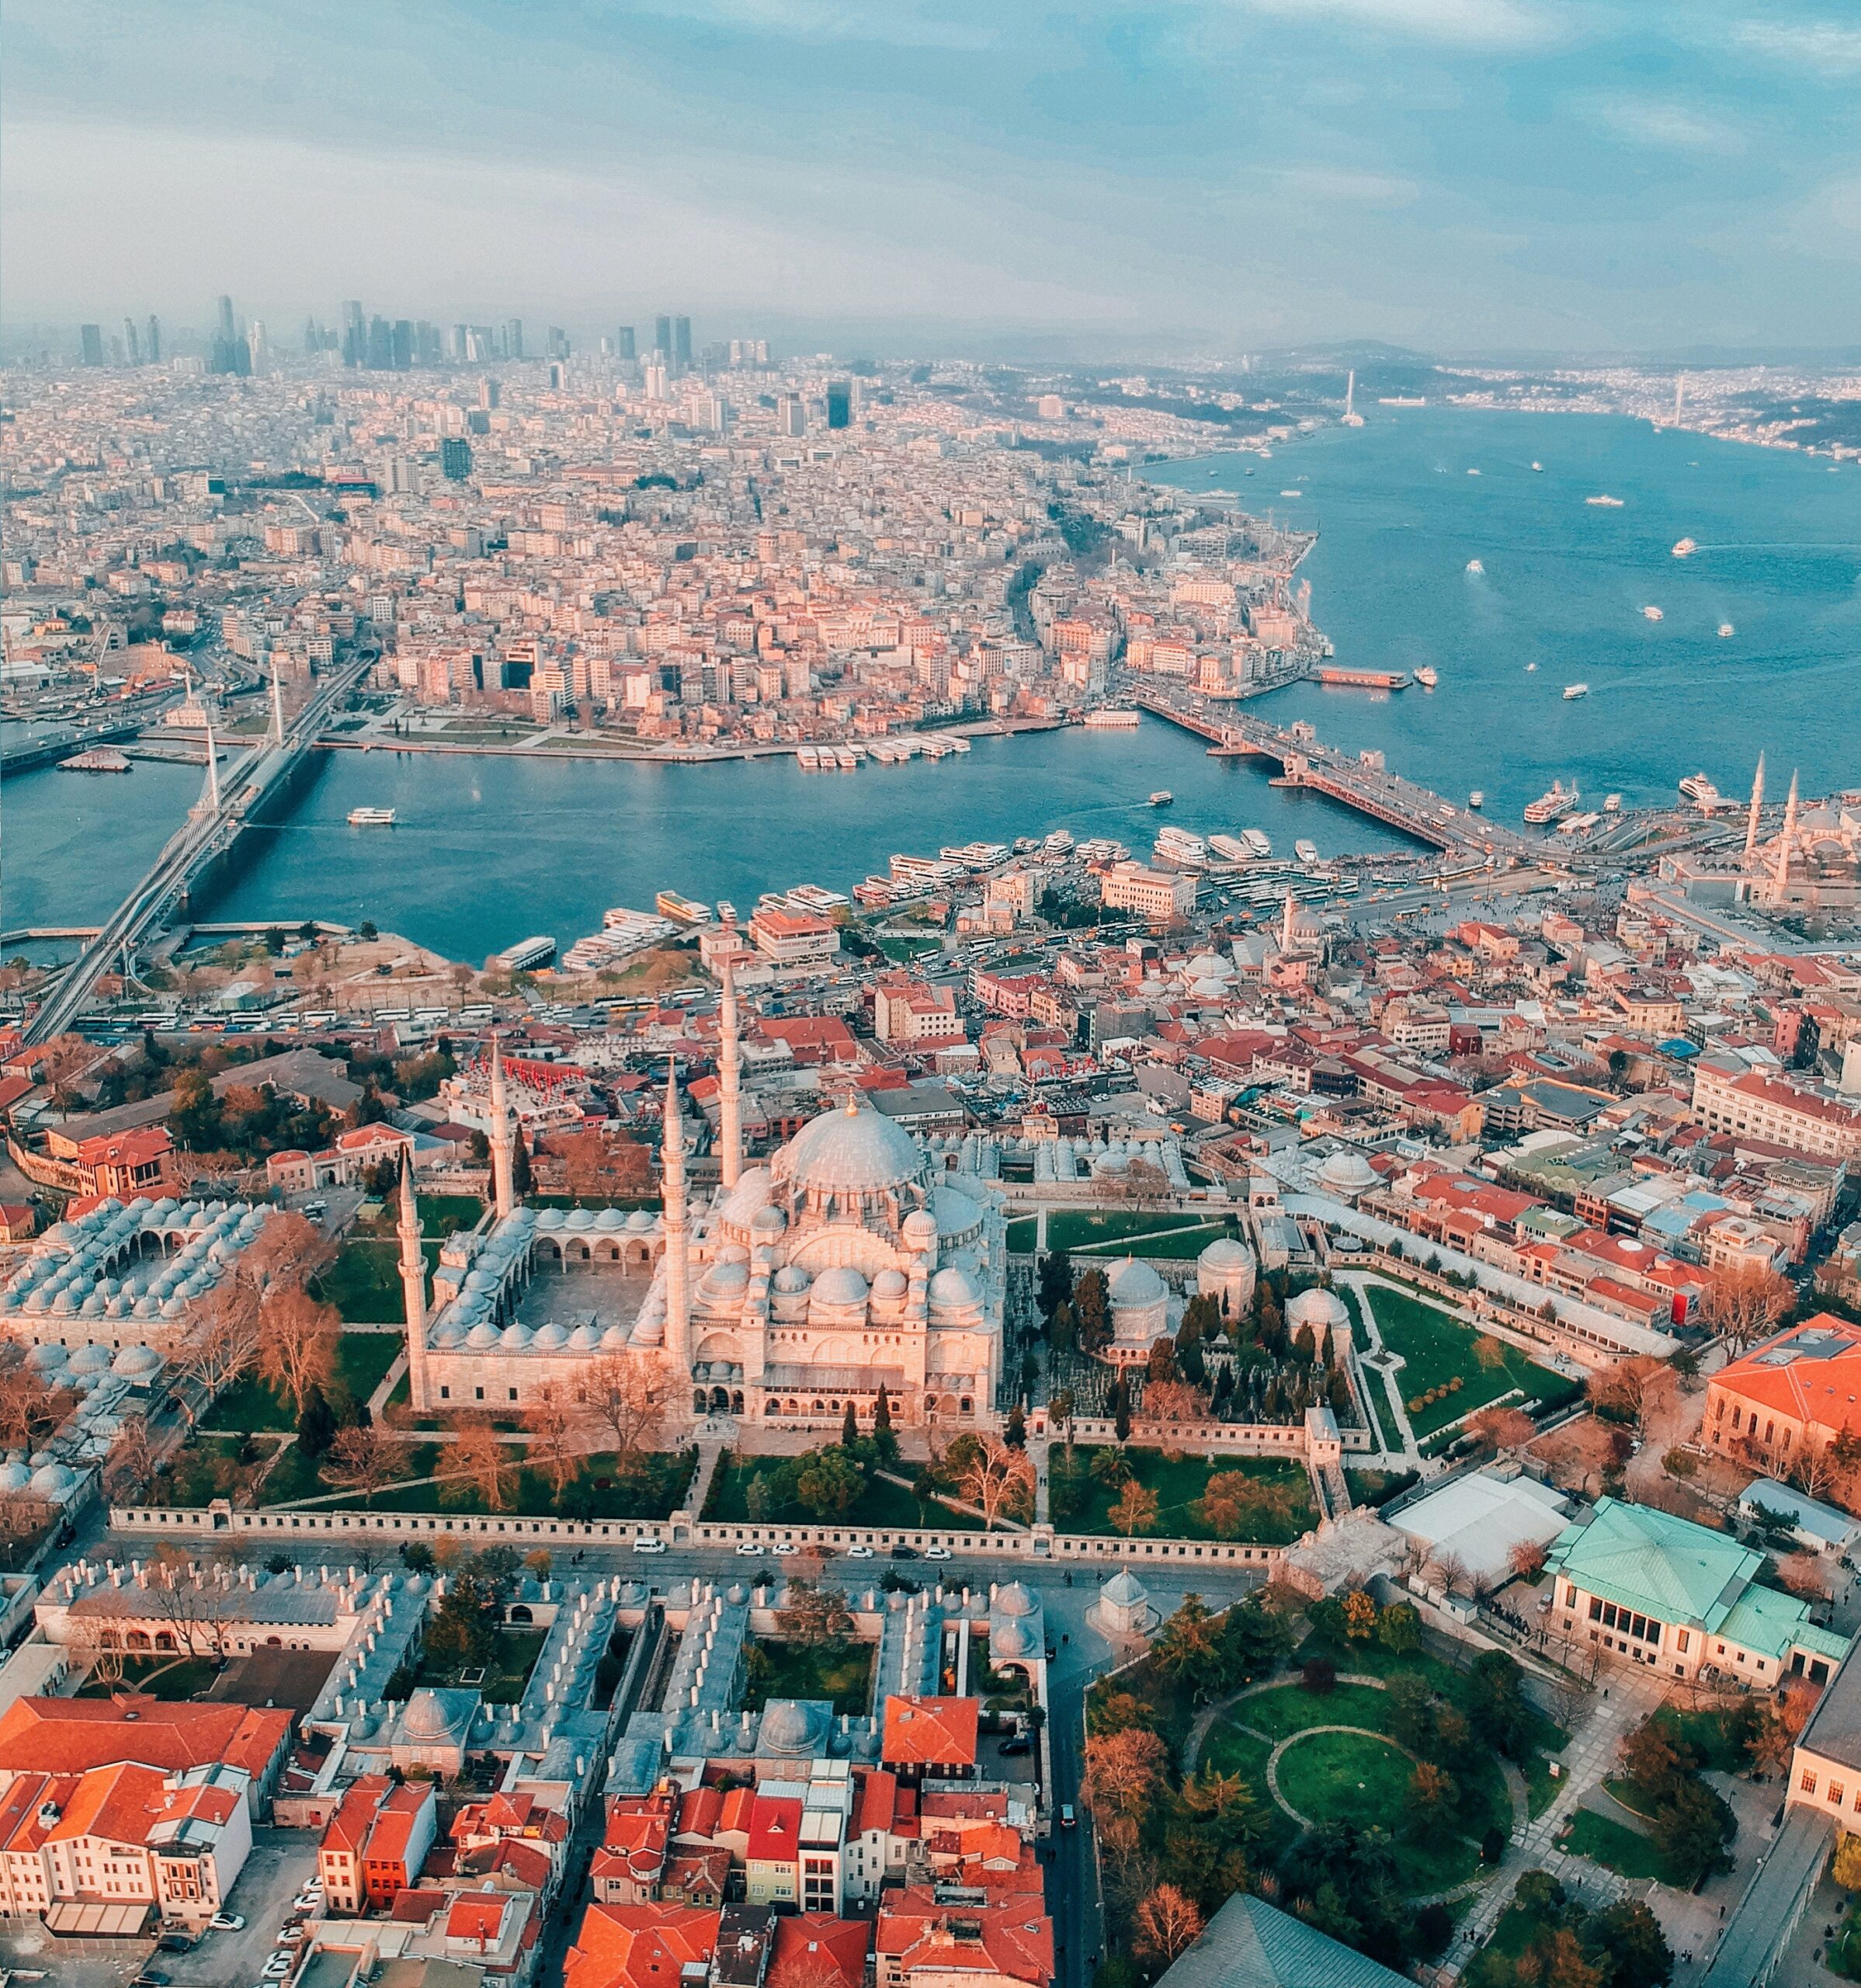 Why isn't Istanbul the capital of Turkey?